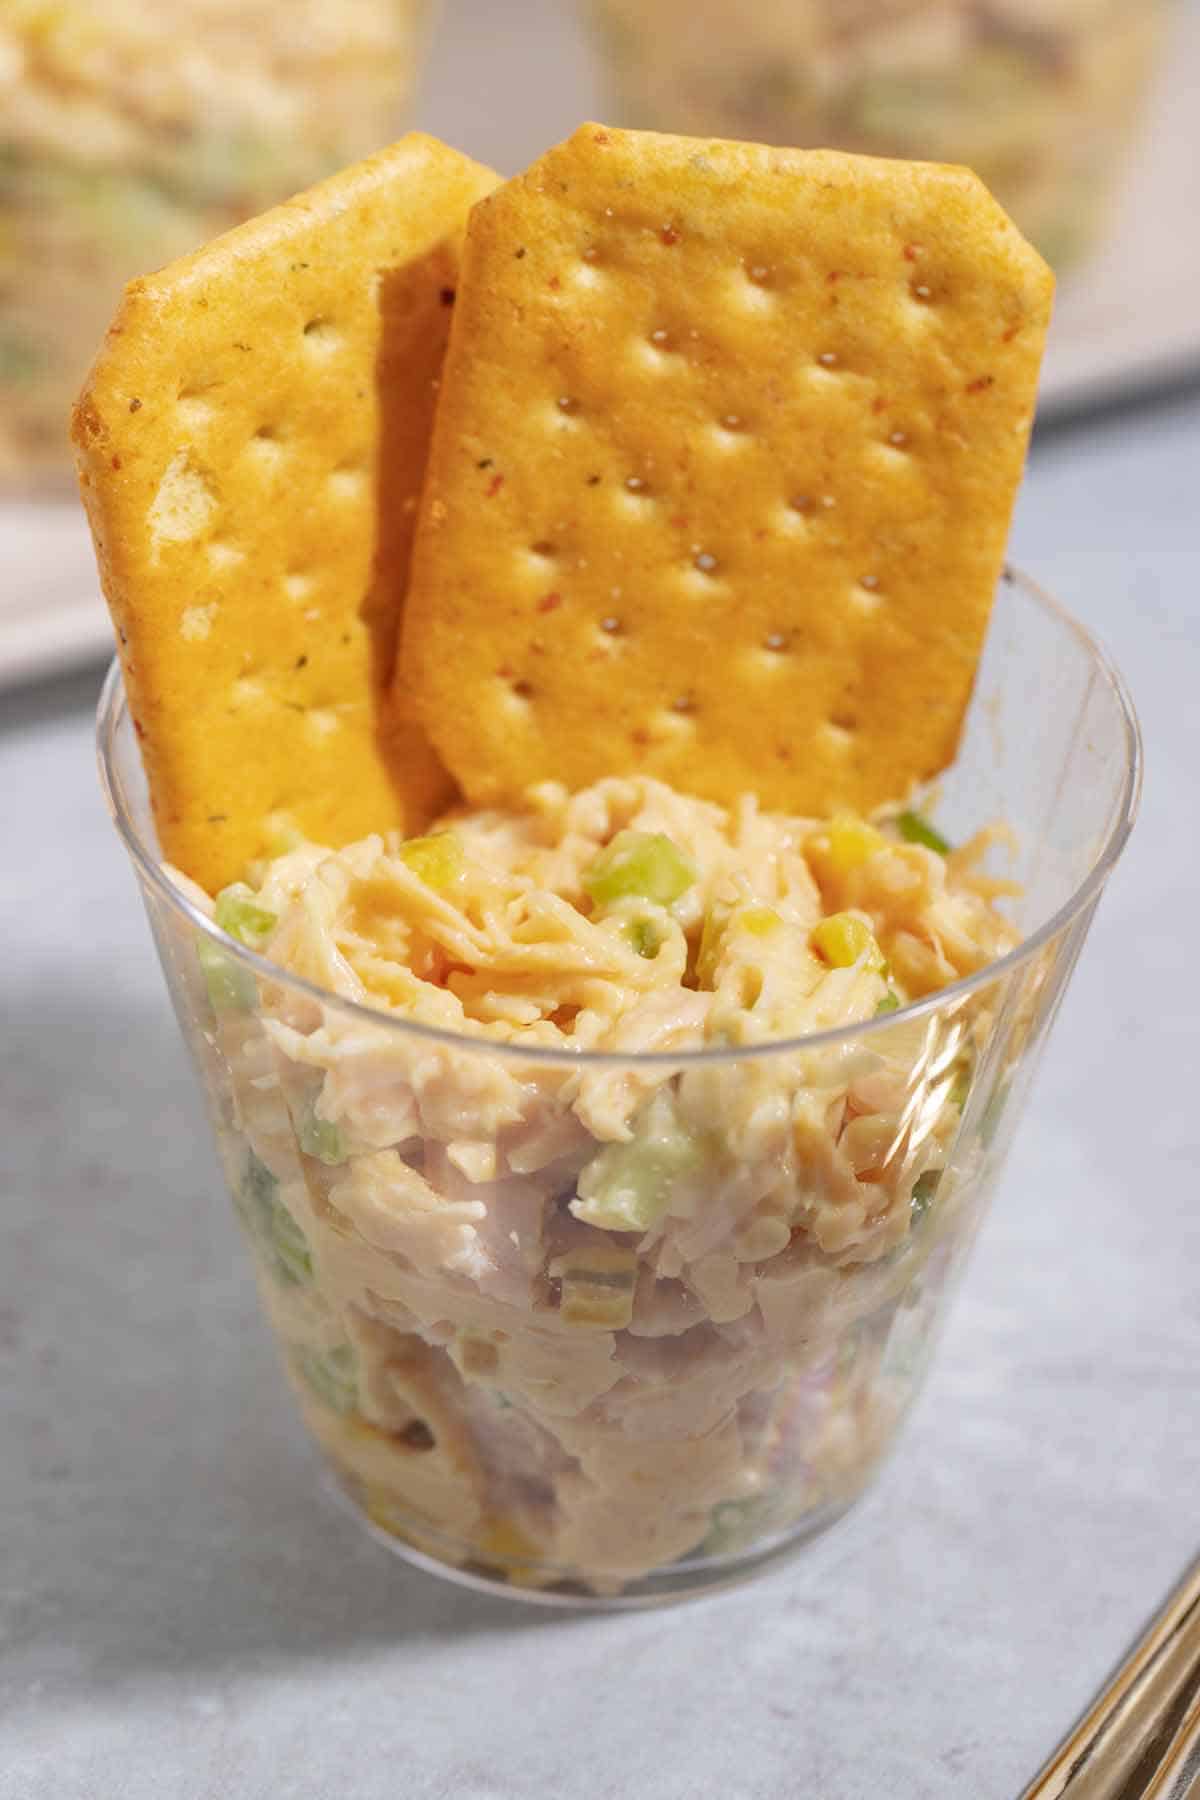 Clear plastic party cup with filled with chicken salad. Two crackers are inside the cup too.